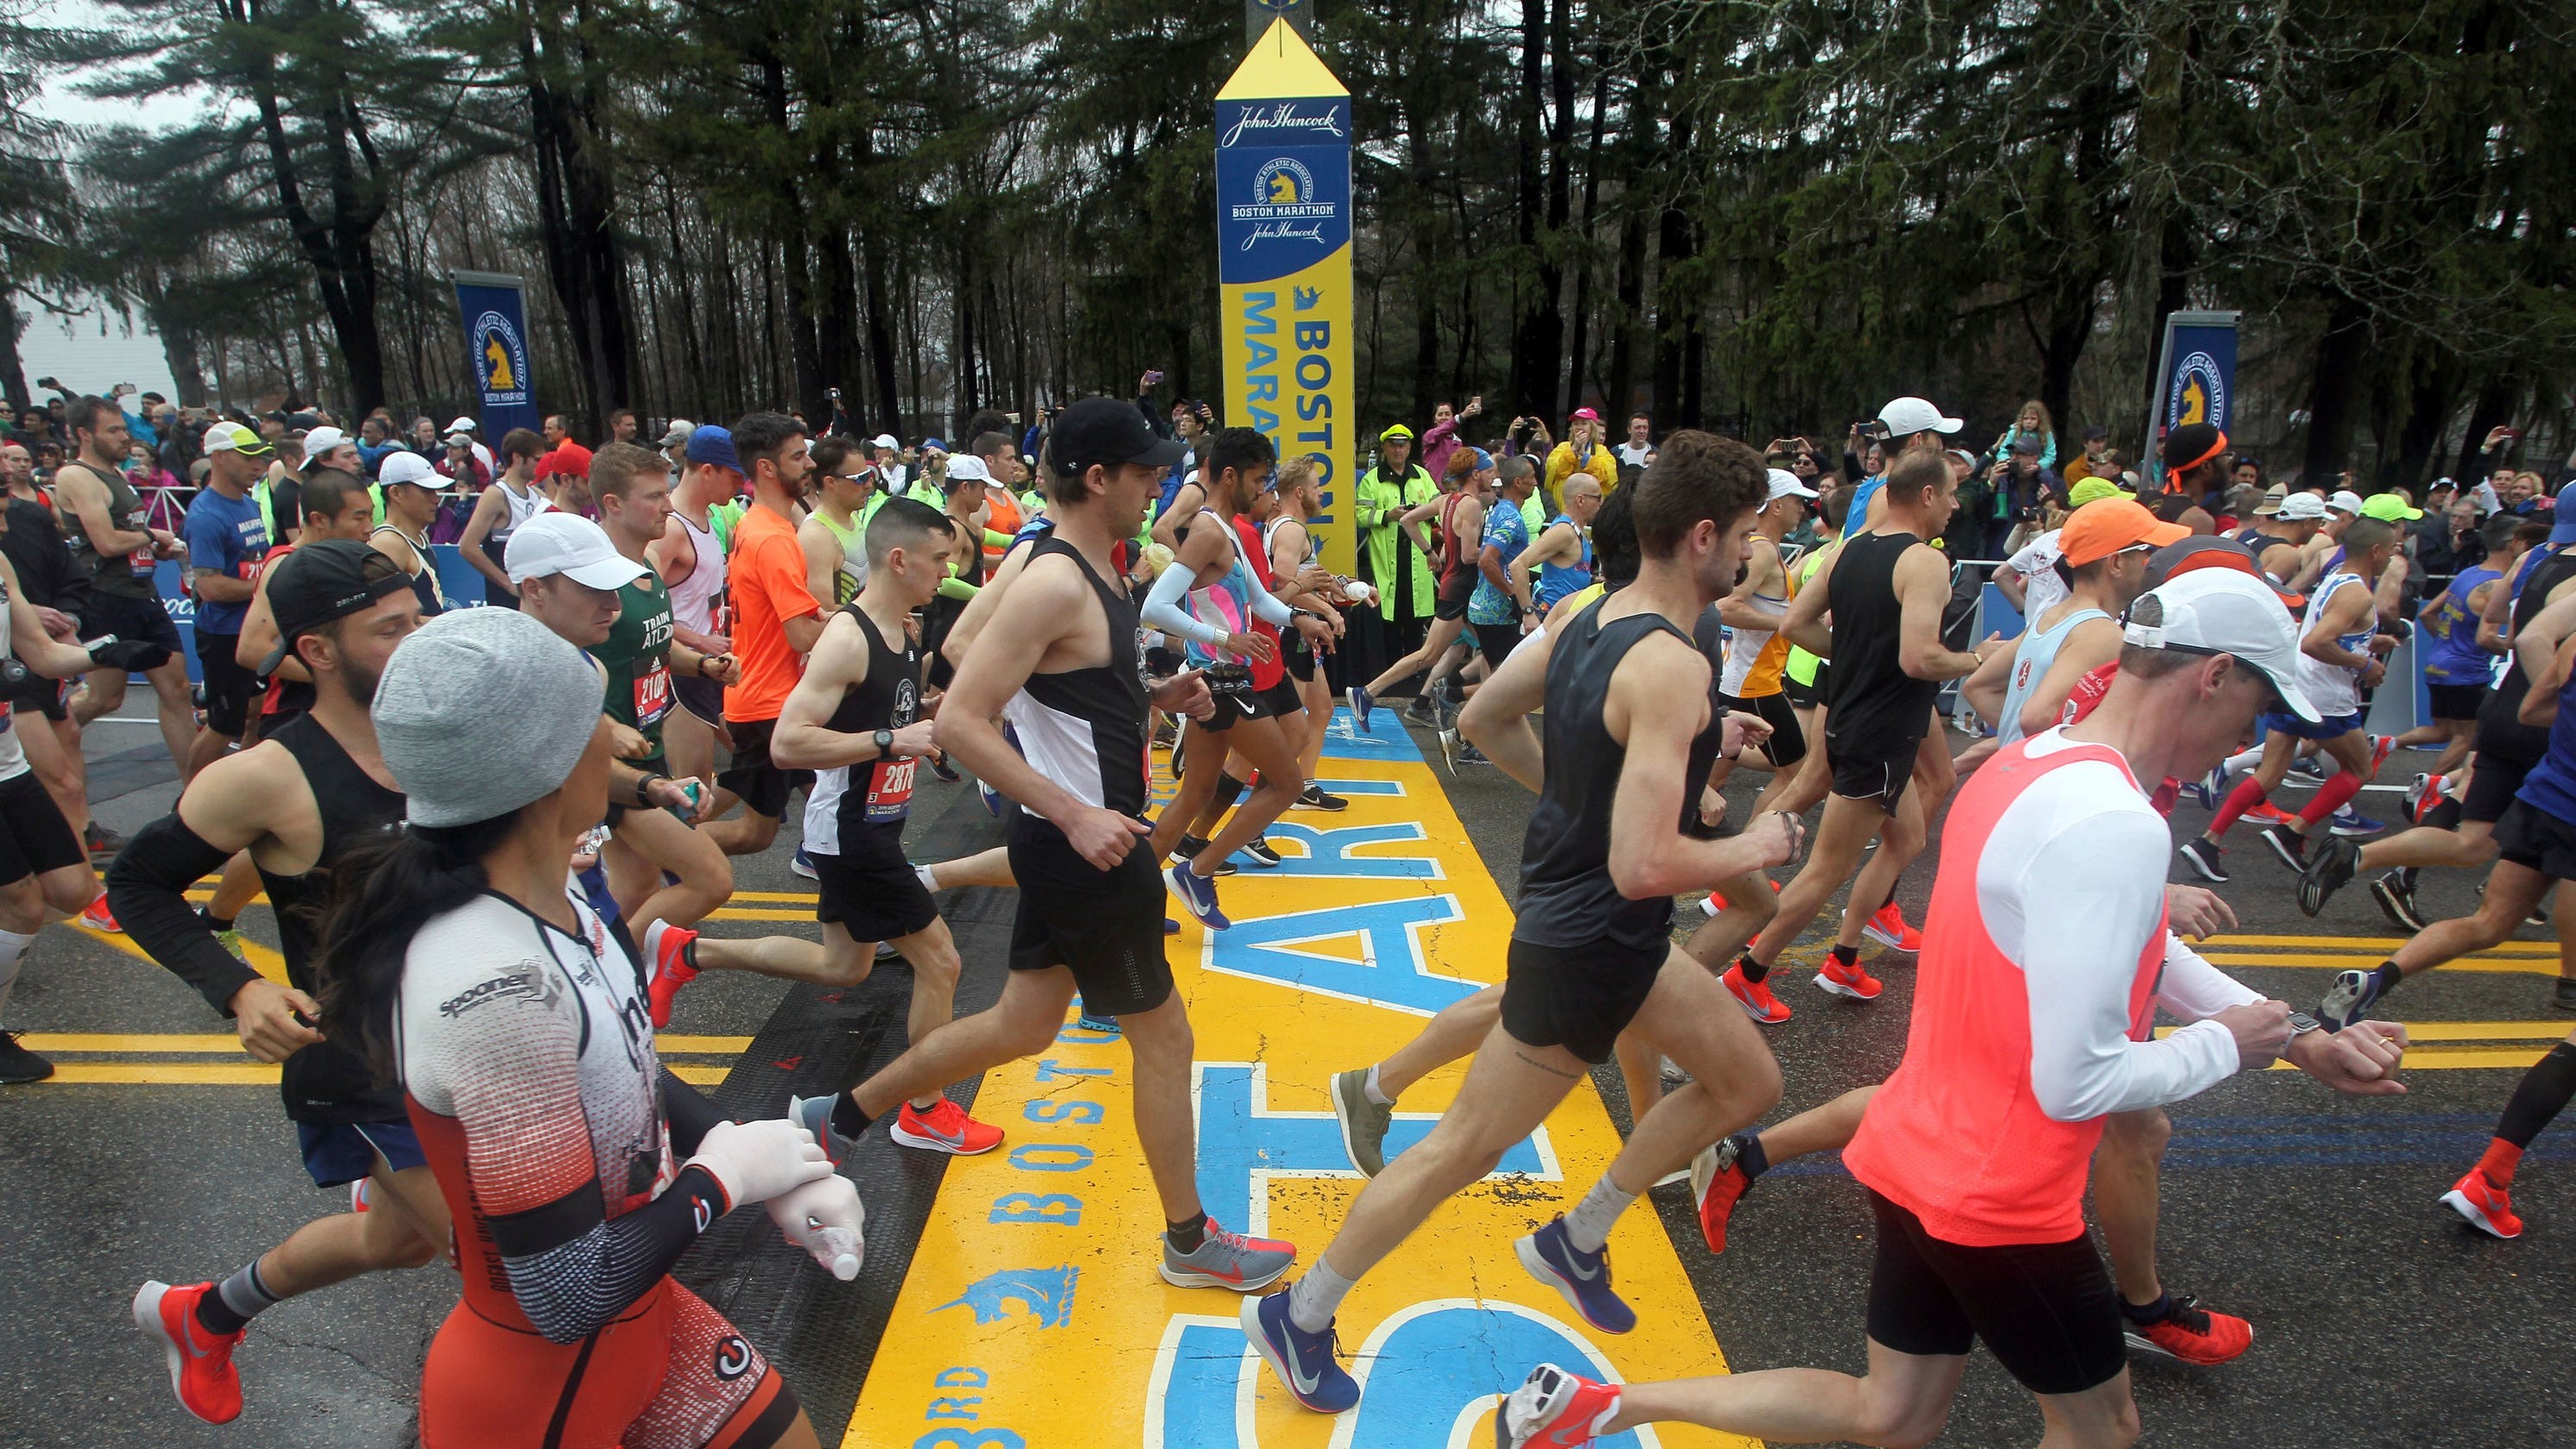 Members of the 2020 Boston Marathon Official Charity Program will be